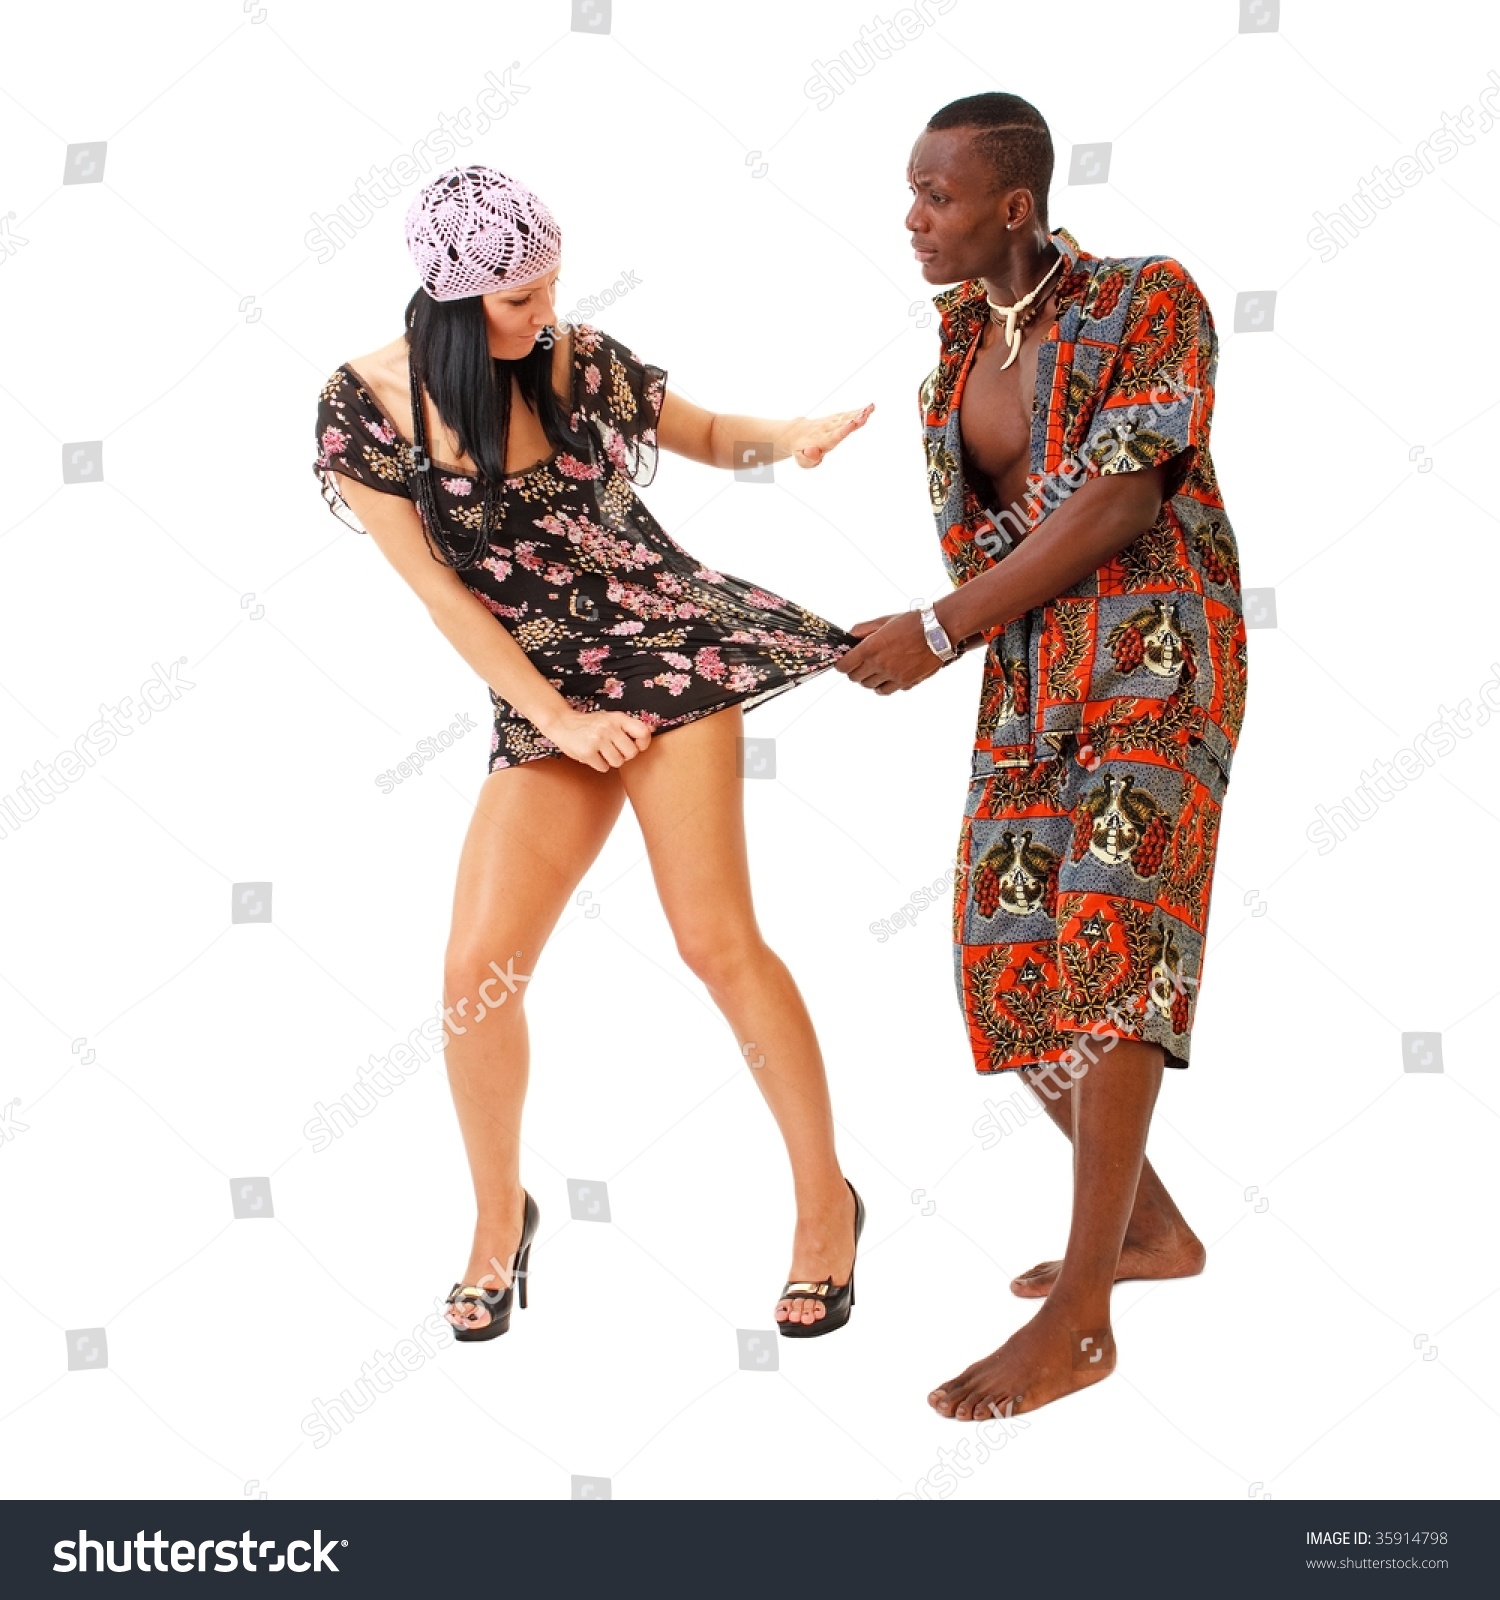 Sexual Harassment White Woman And Black Man On A White